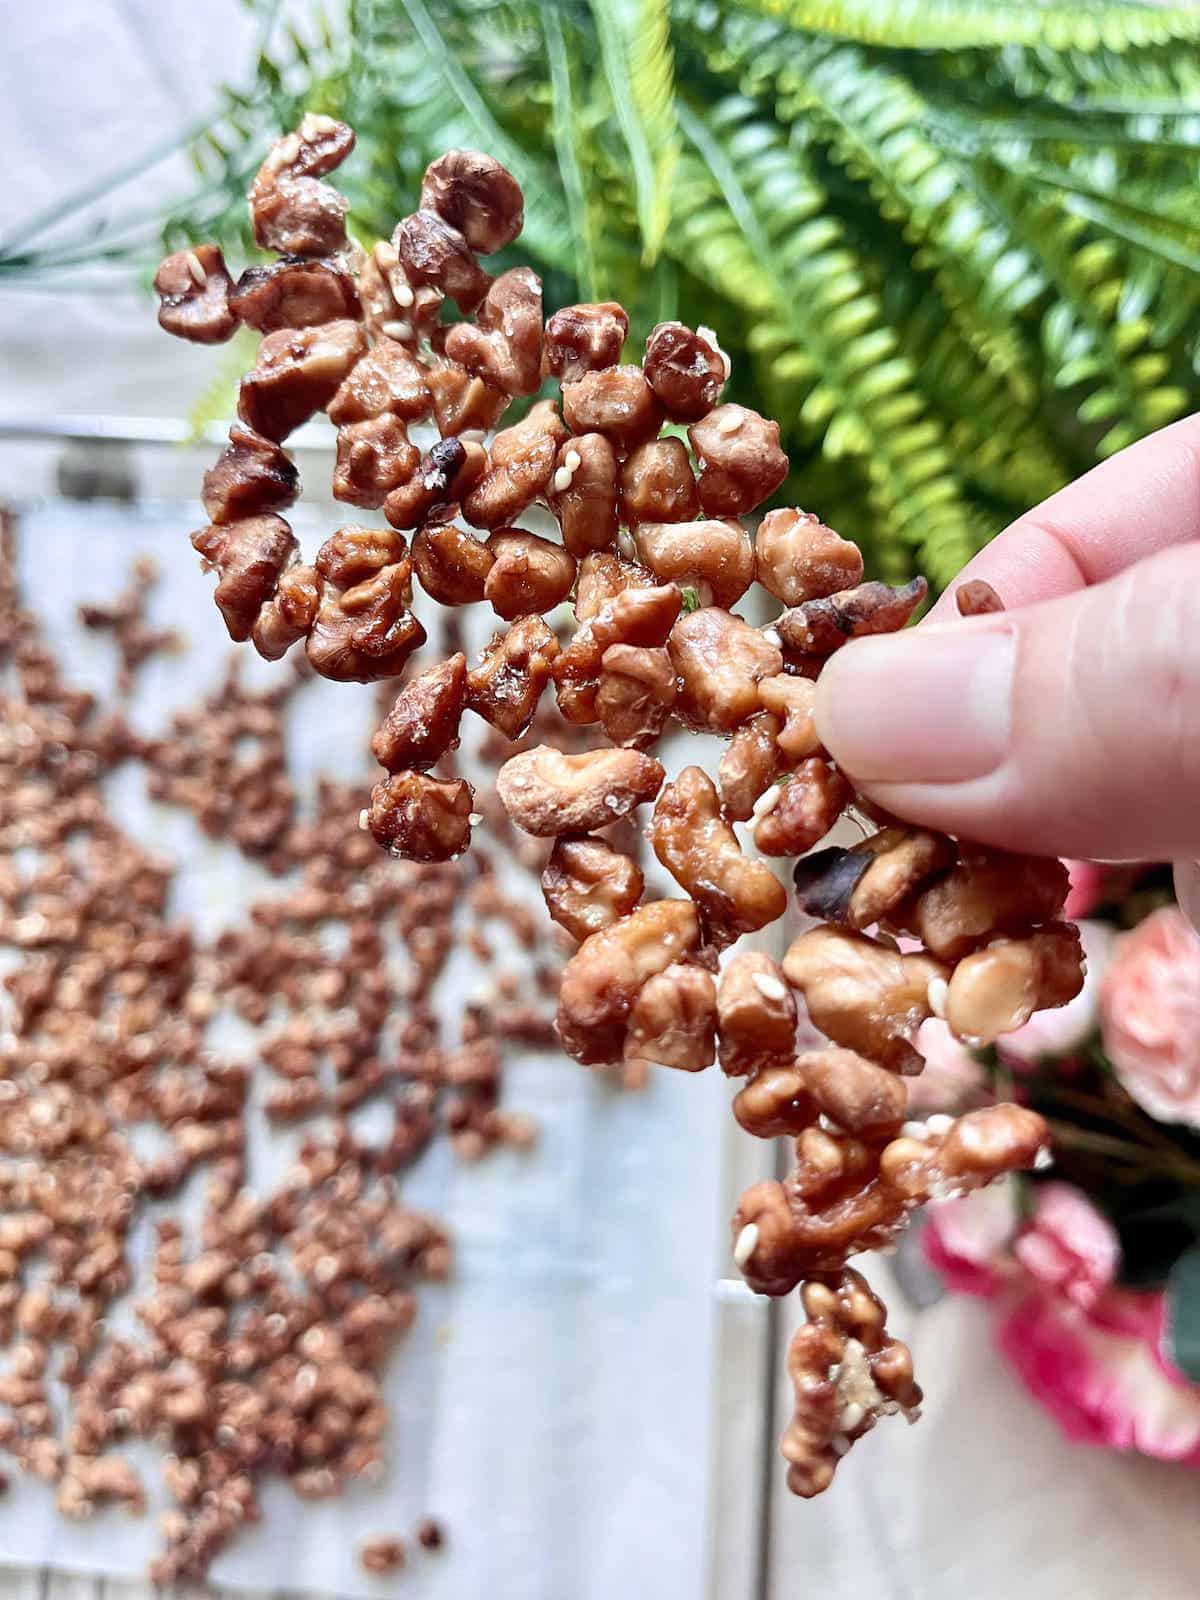 Holding up a big pieces of Chinese walnut candied with sesame seeds.